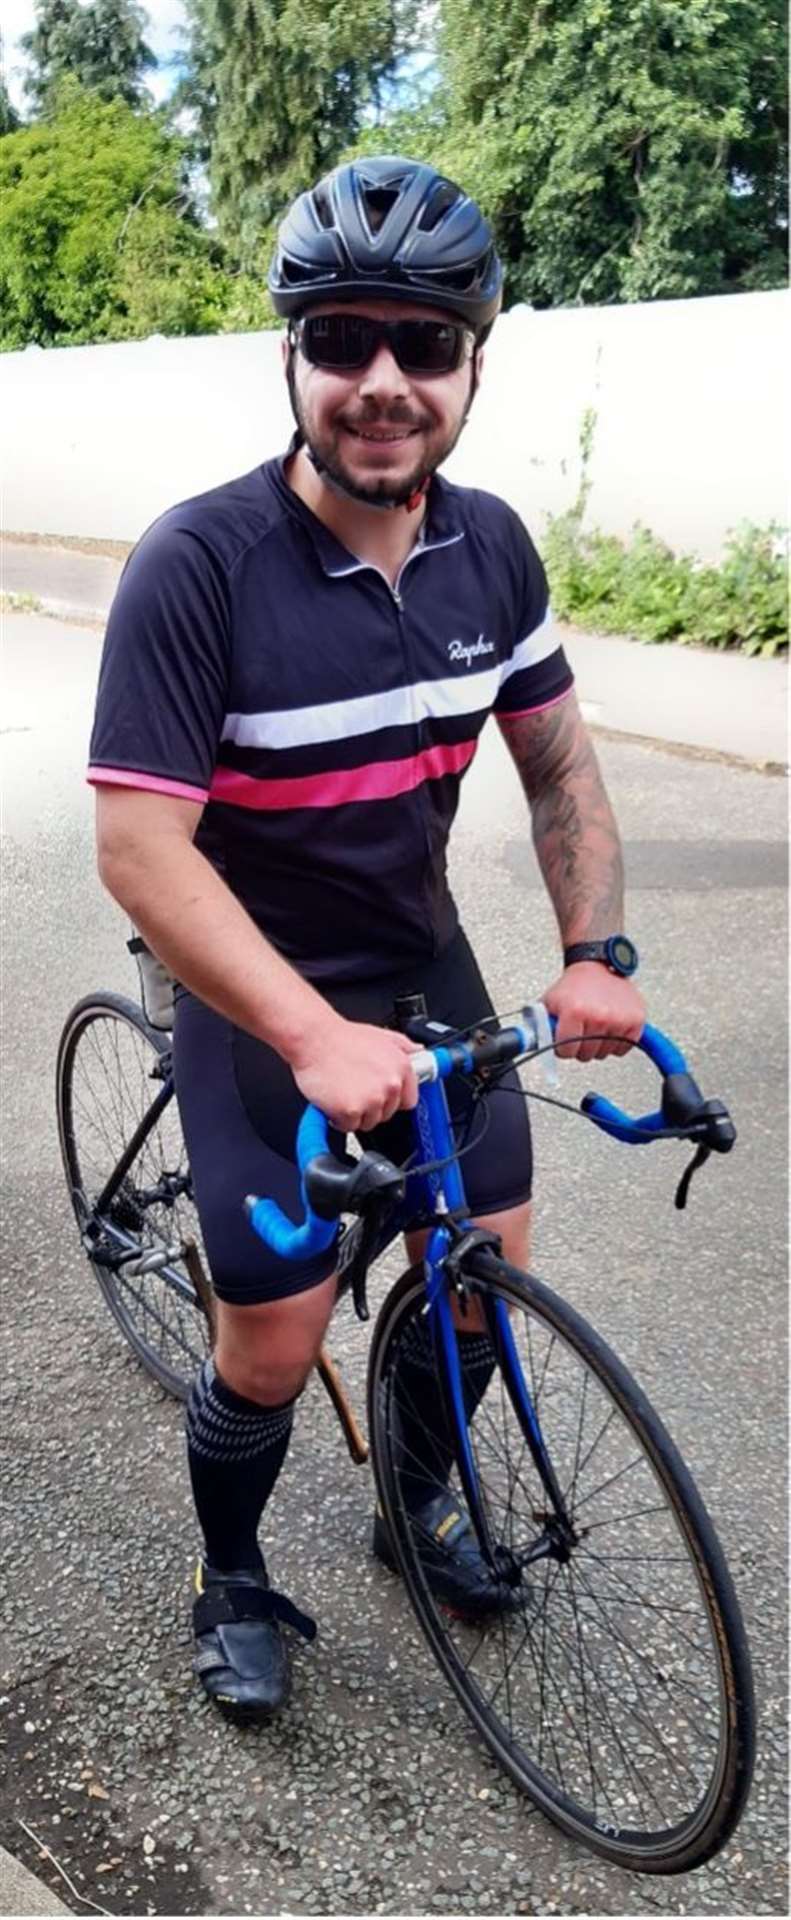 Alex is cycling to raise money for the children's ward that cared for his daughter